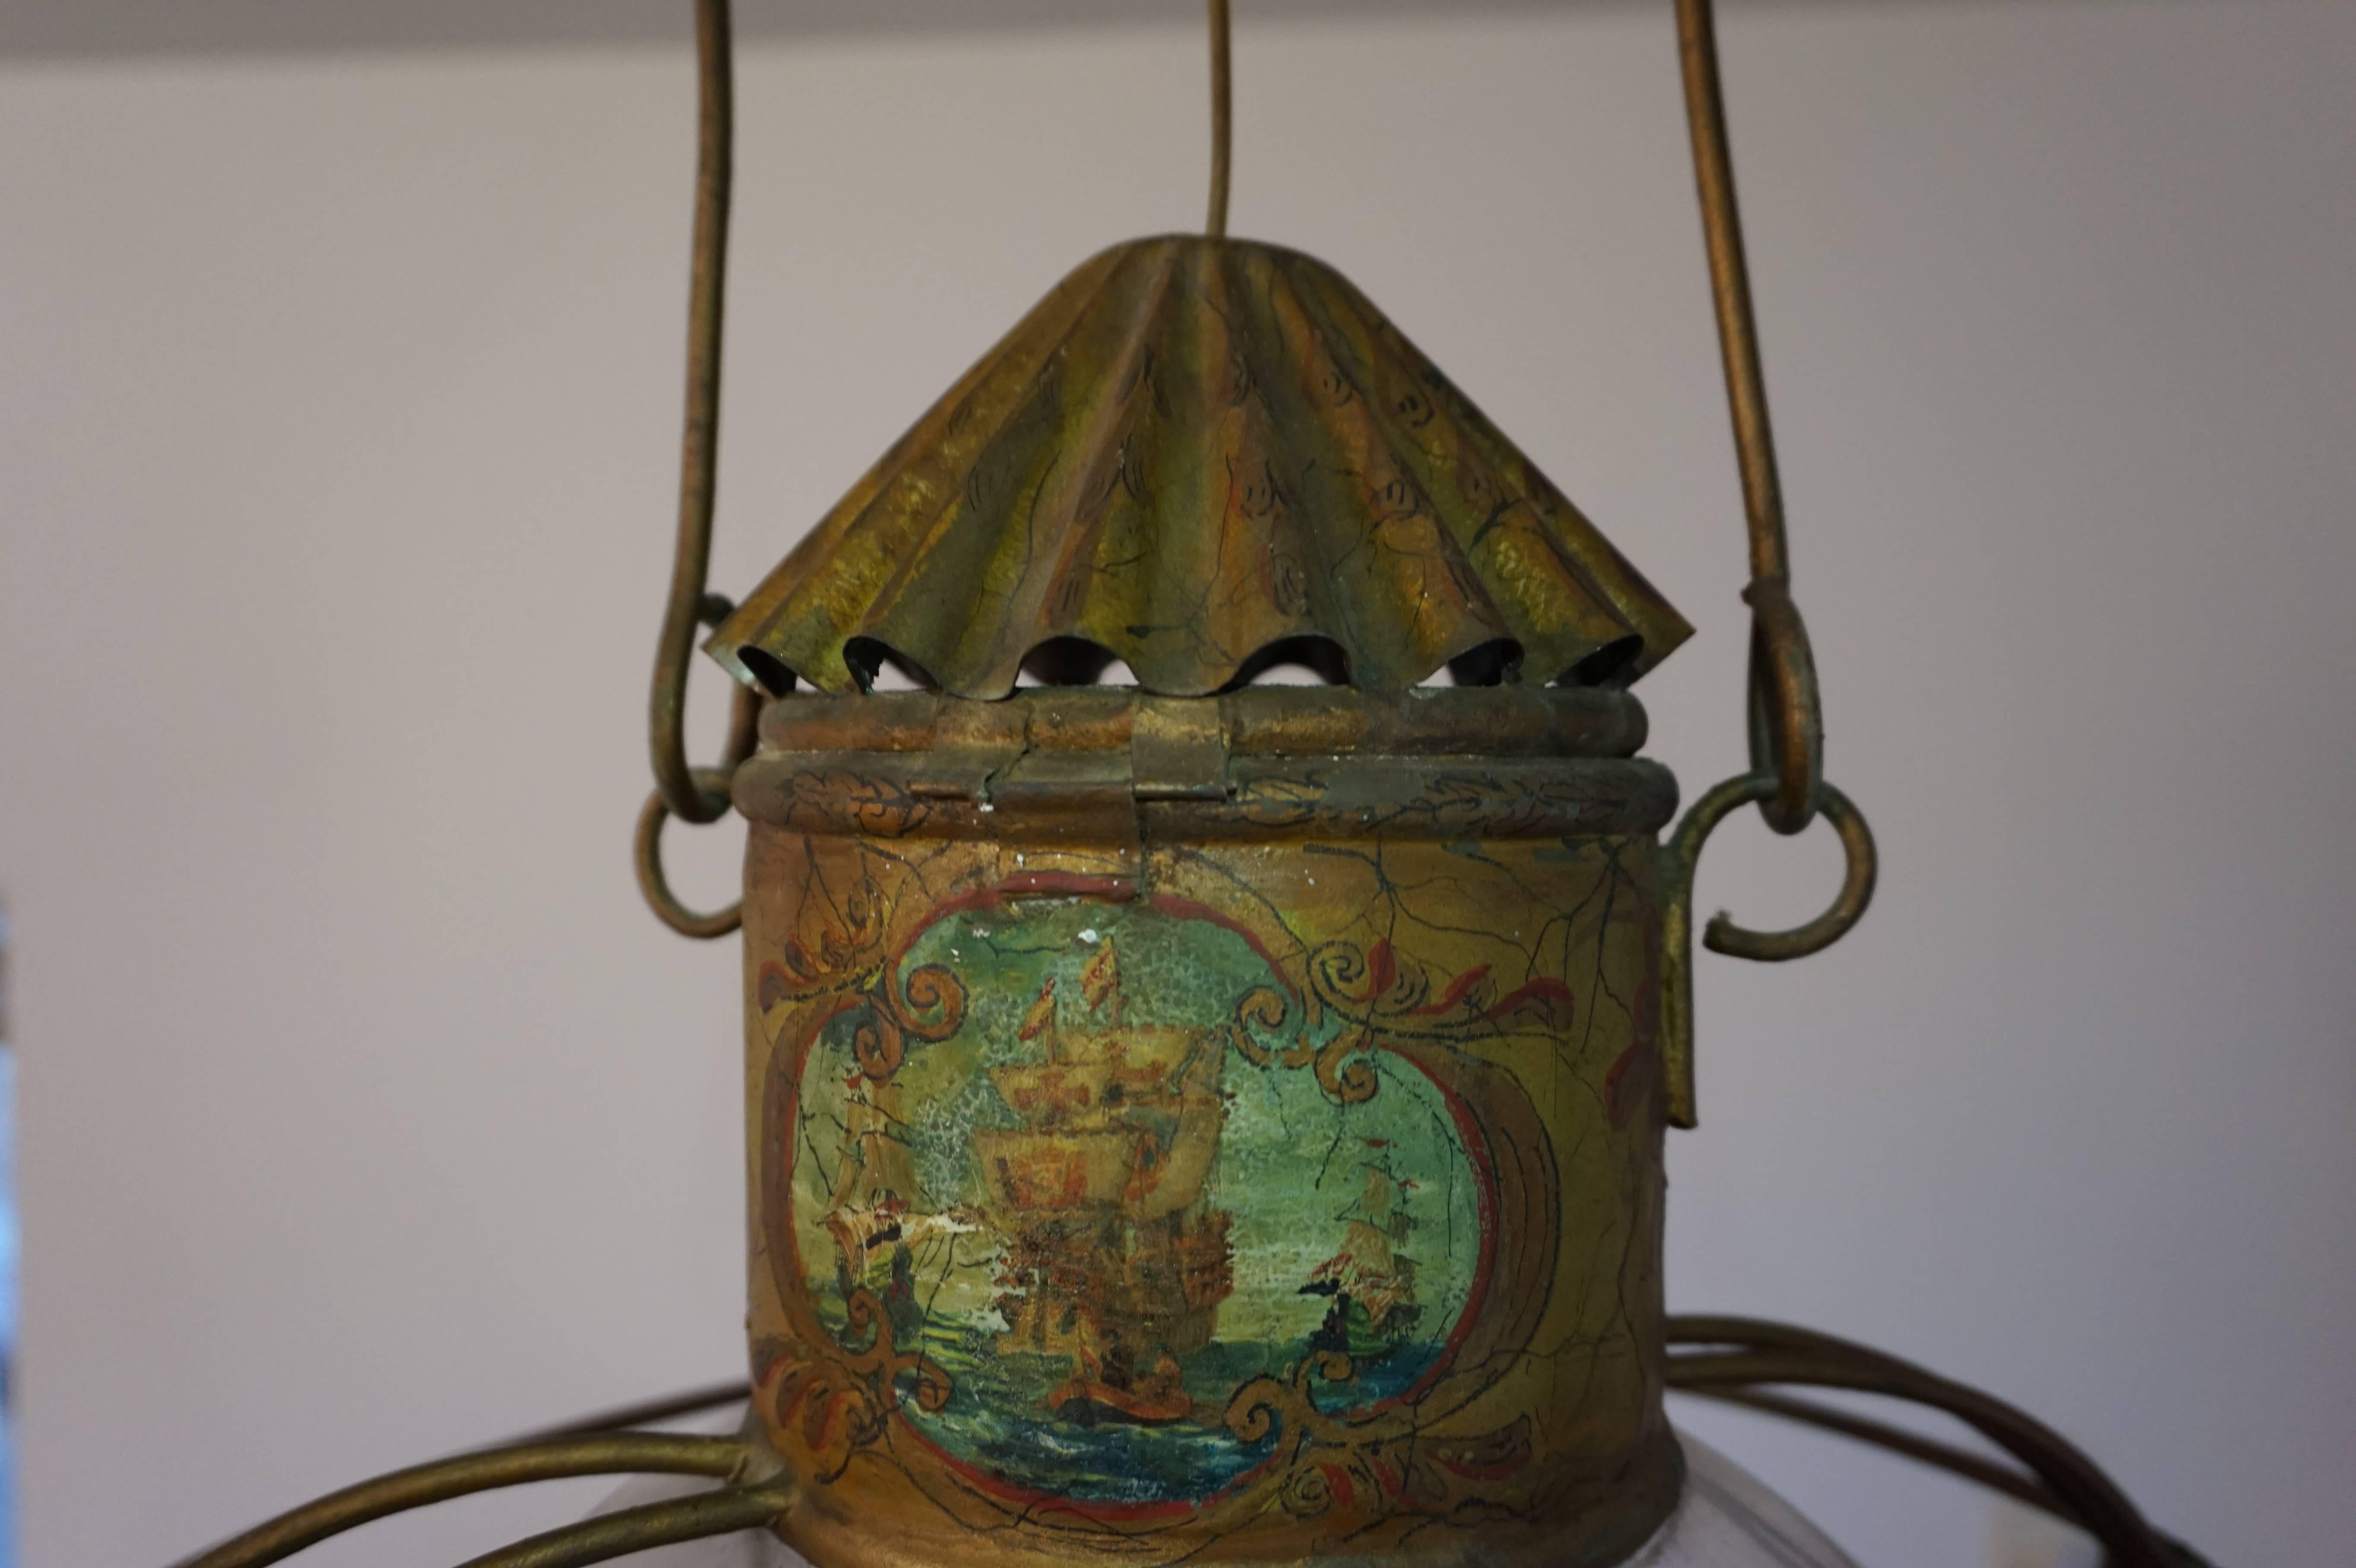 Rare ships lantern with original, hand-painted galleons at sea.

This rare and entirely hand crafted ships lantern is made electrical at some point in time, but originally it was made for candles (see image7). It still can be used as a candle